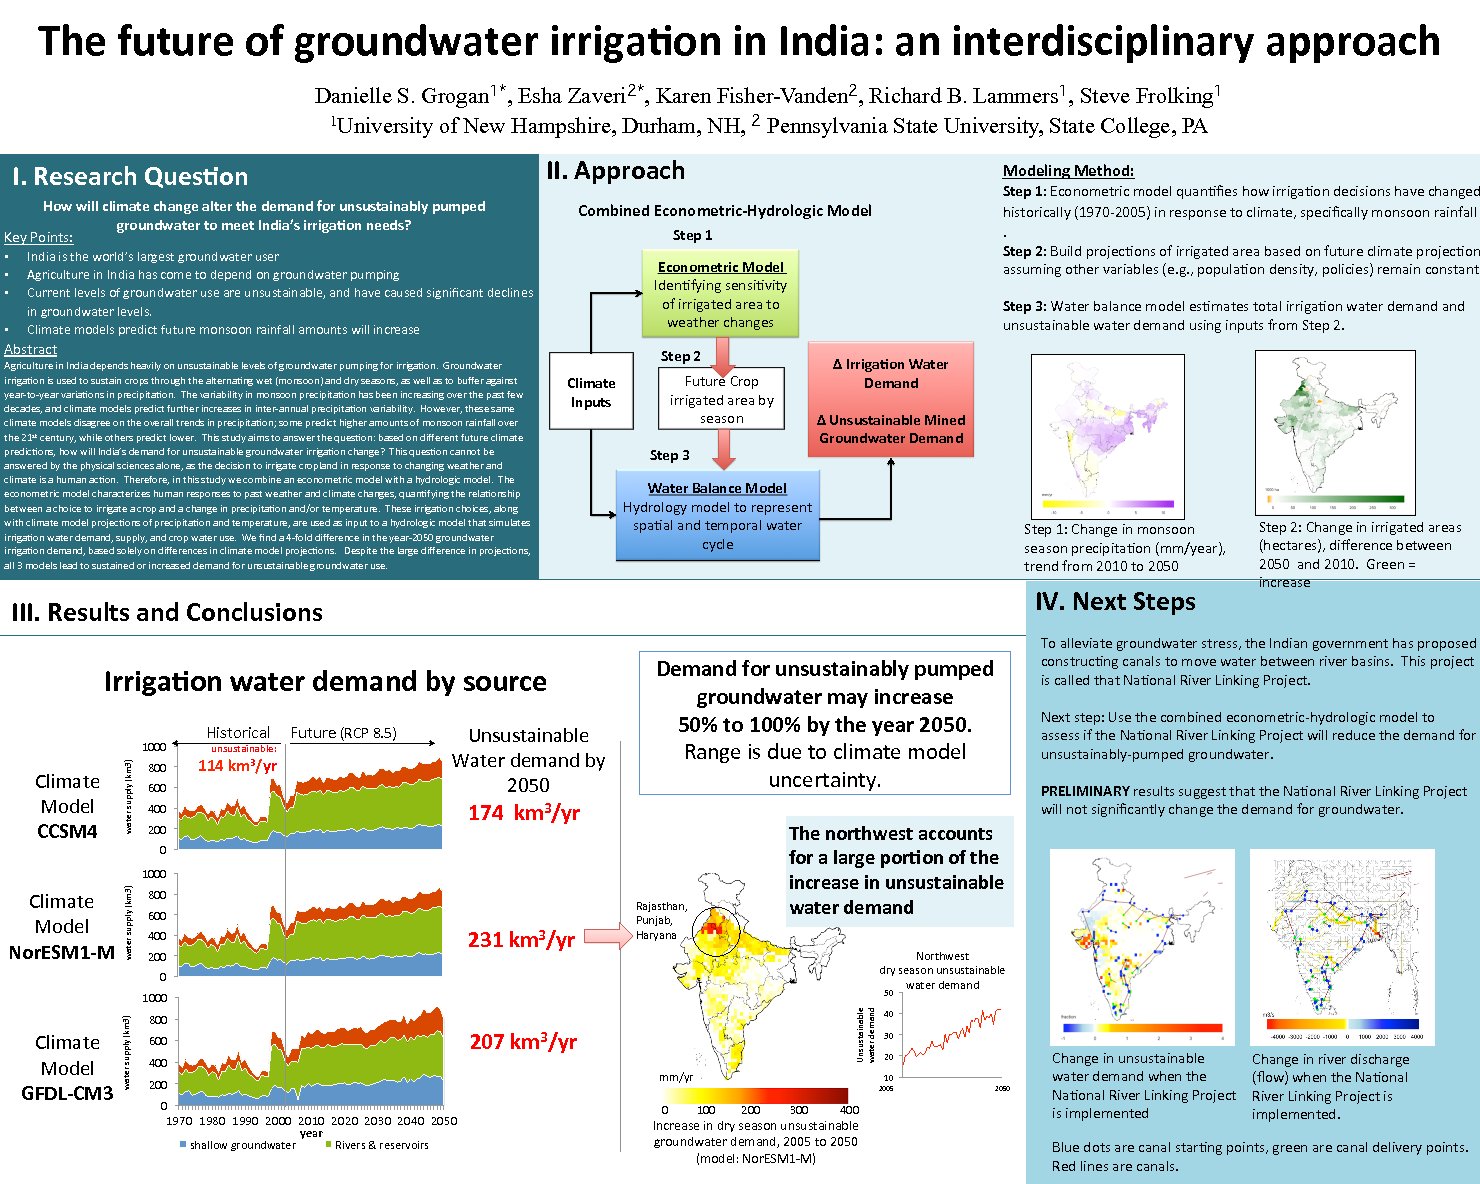 The Future Of Groundwater Irrigation In India by dgrogan